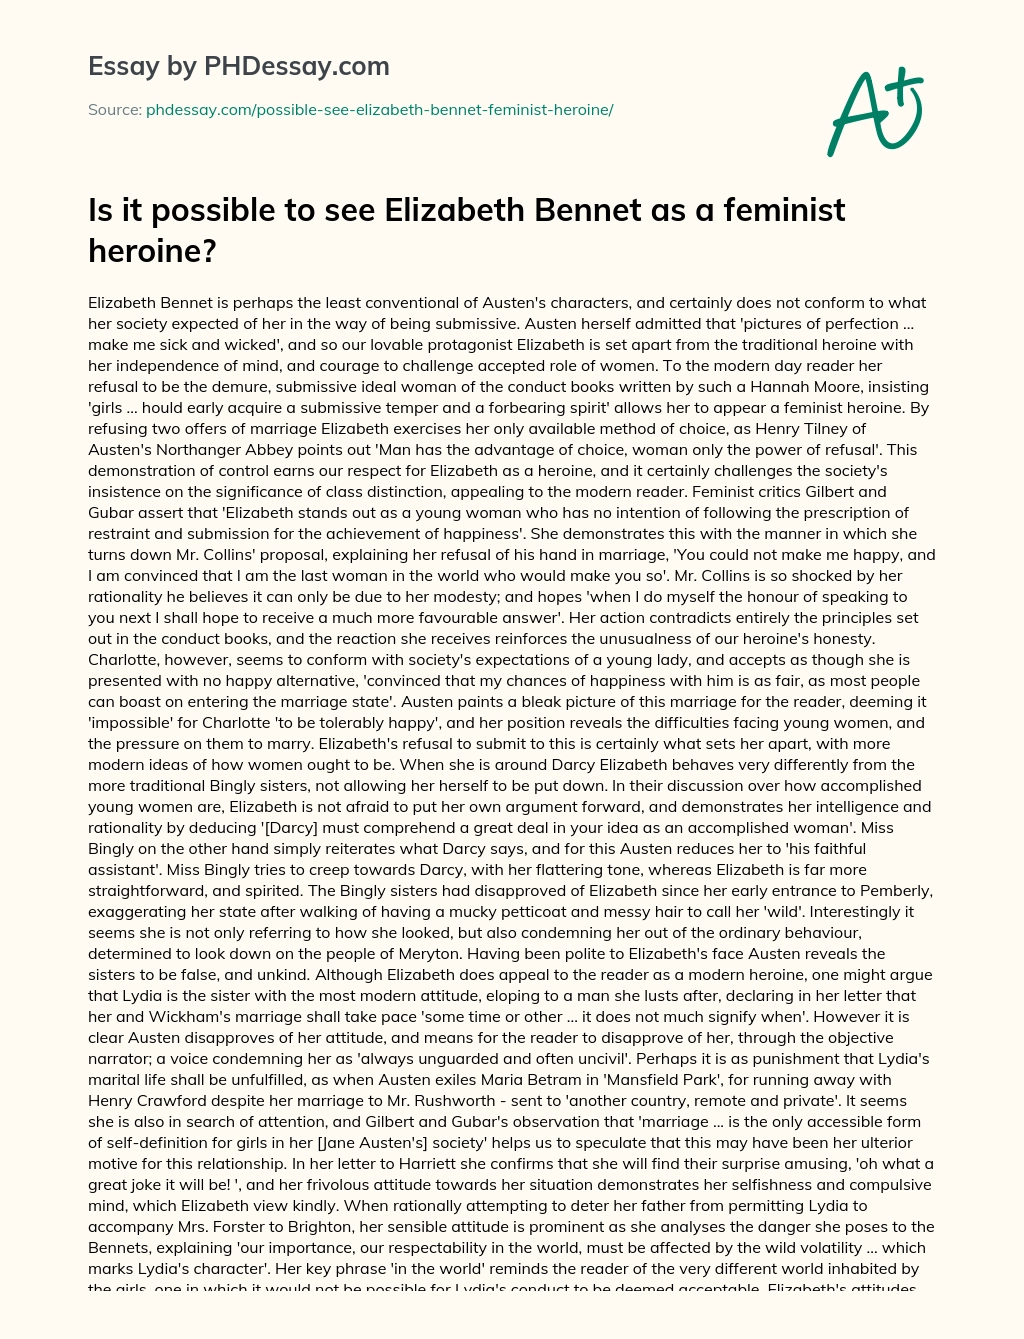 Is it possible to see Elizabeth Bennet as a feminist heroine? essay